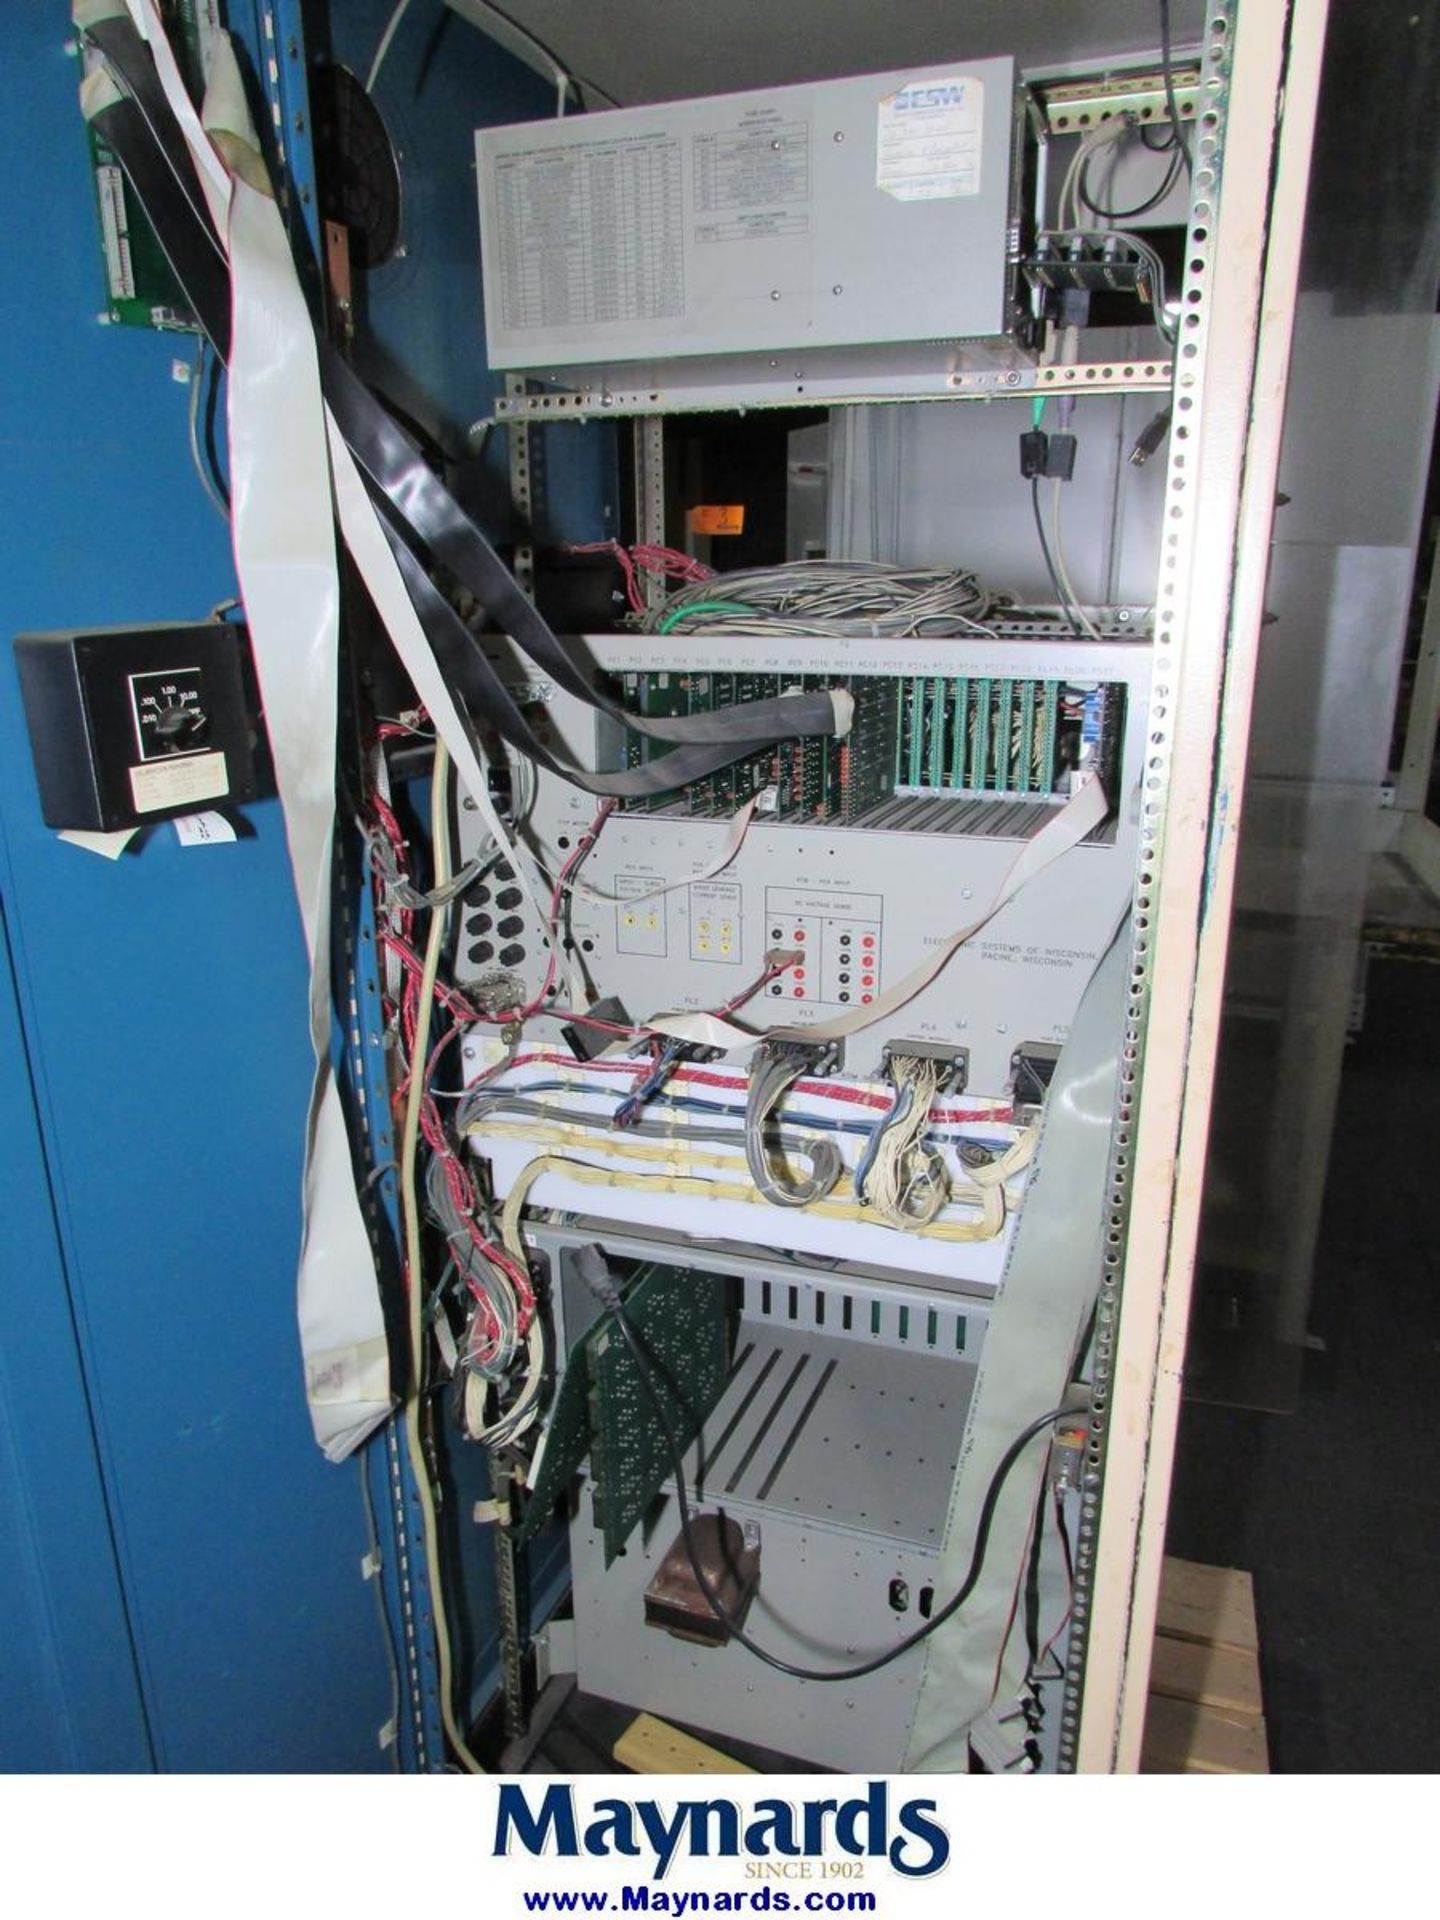 DC Power Supply Electrical Cabinet - Image 6 of 6